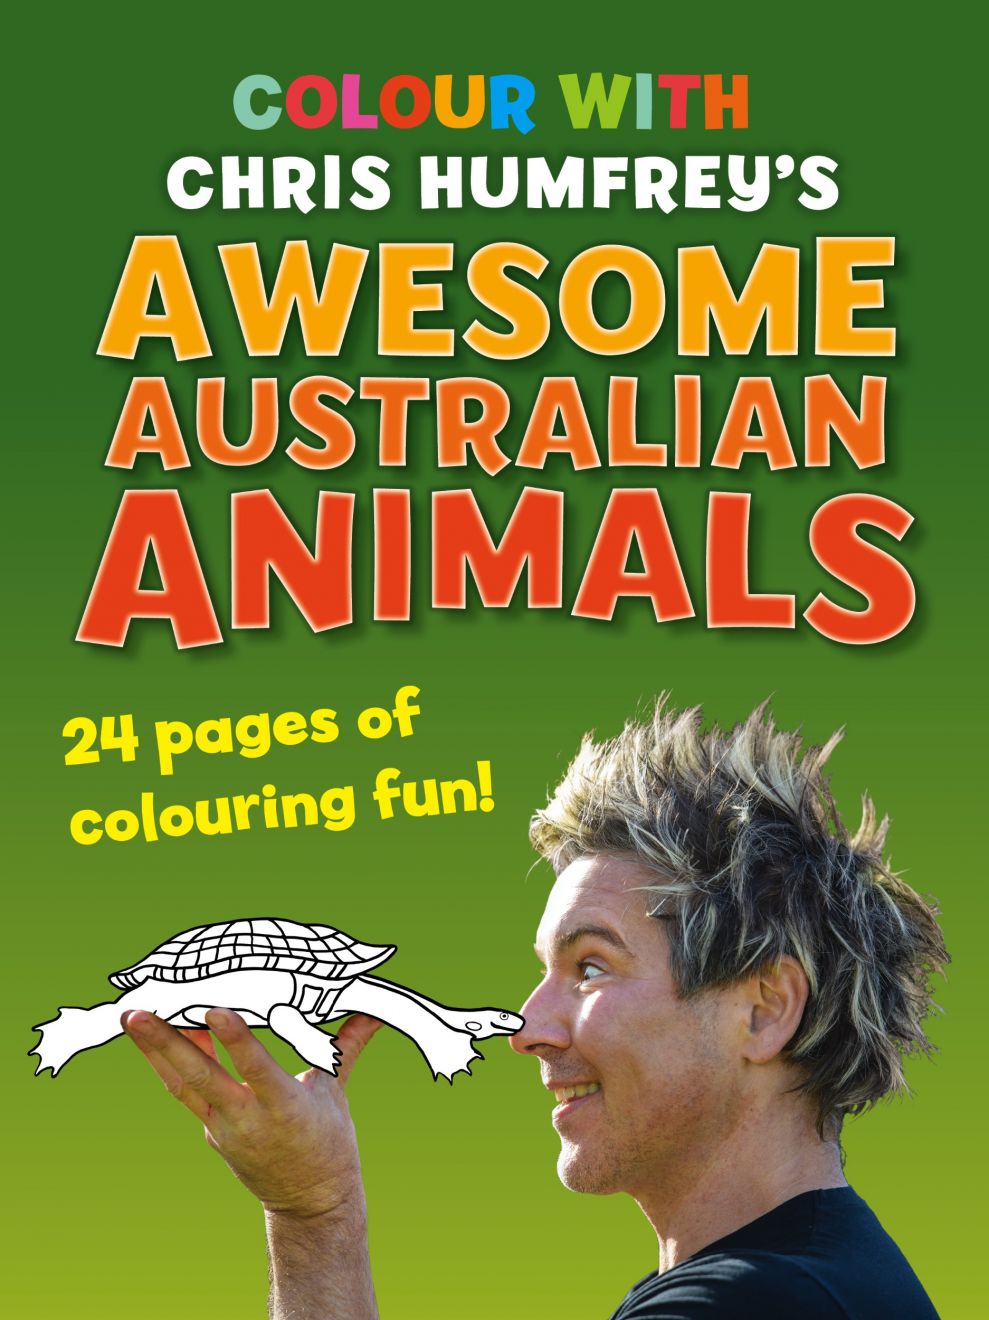 Colour with Chris Humfrey's Awesome Australian Animals